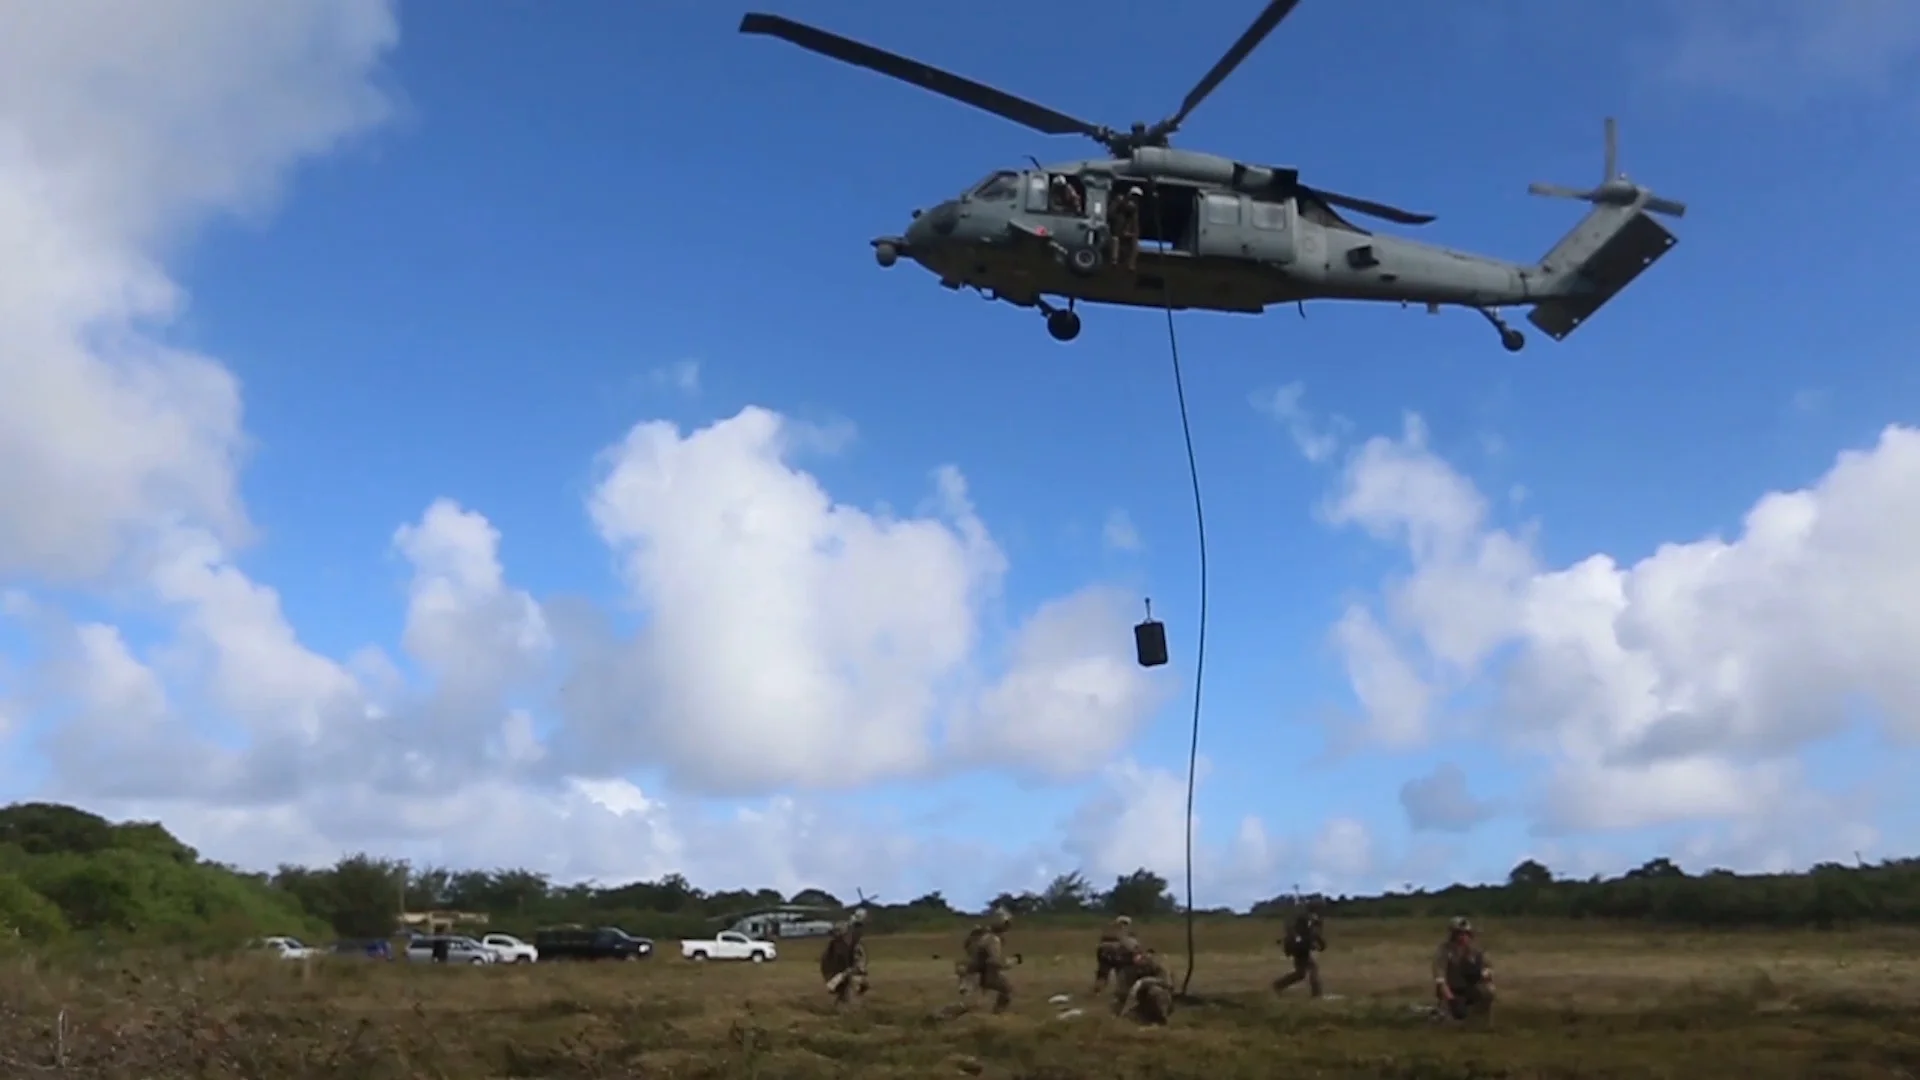 Marines clear rope from beneath helicopt, Stock Video